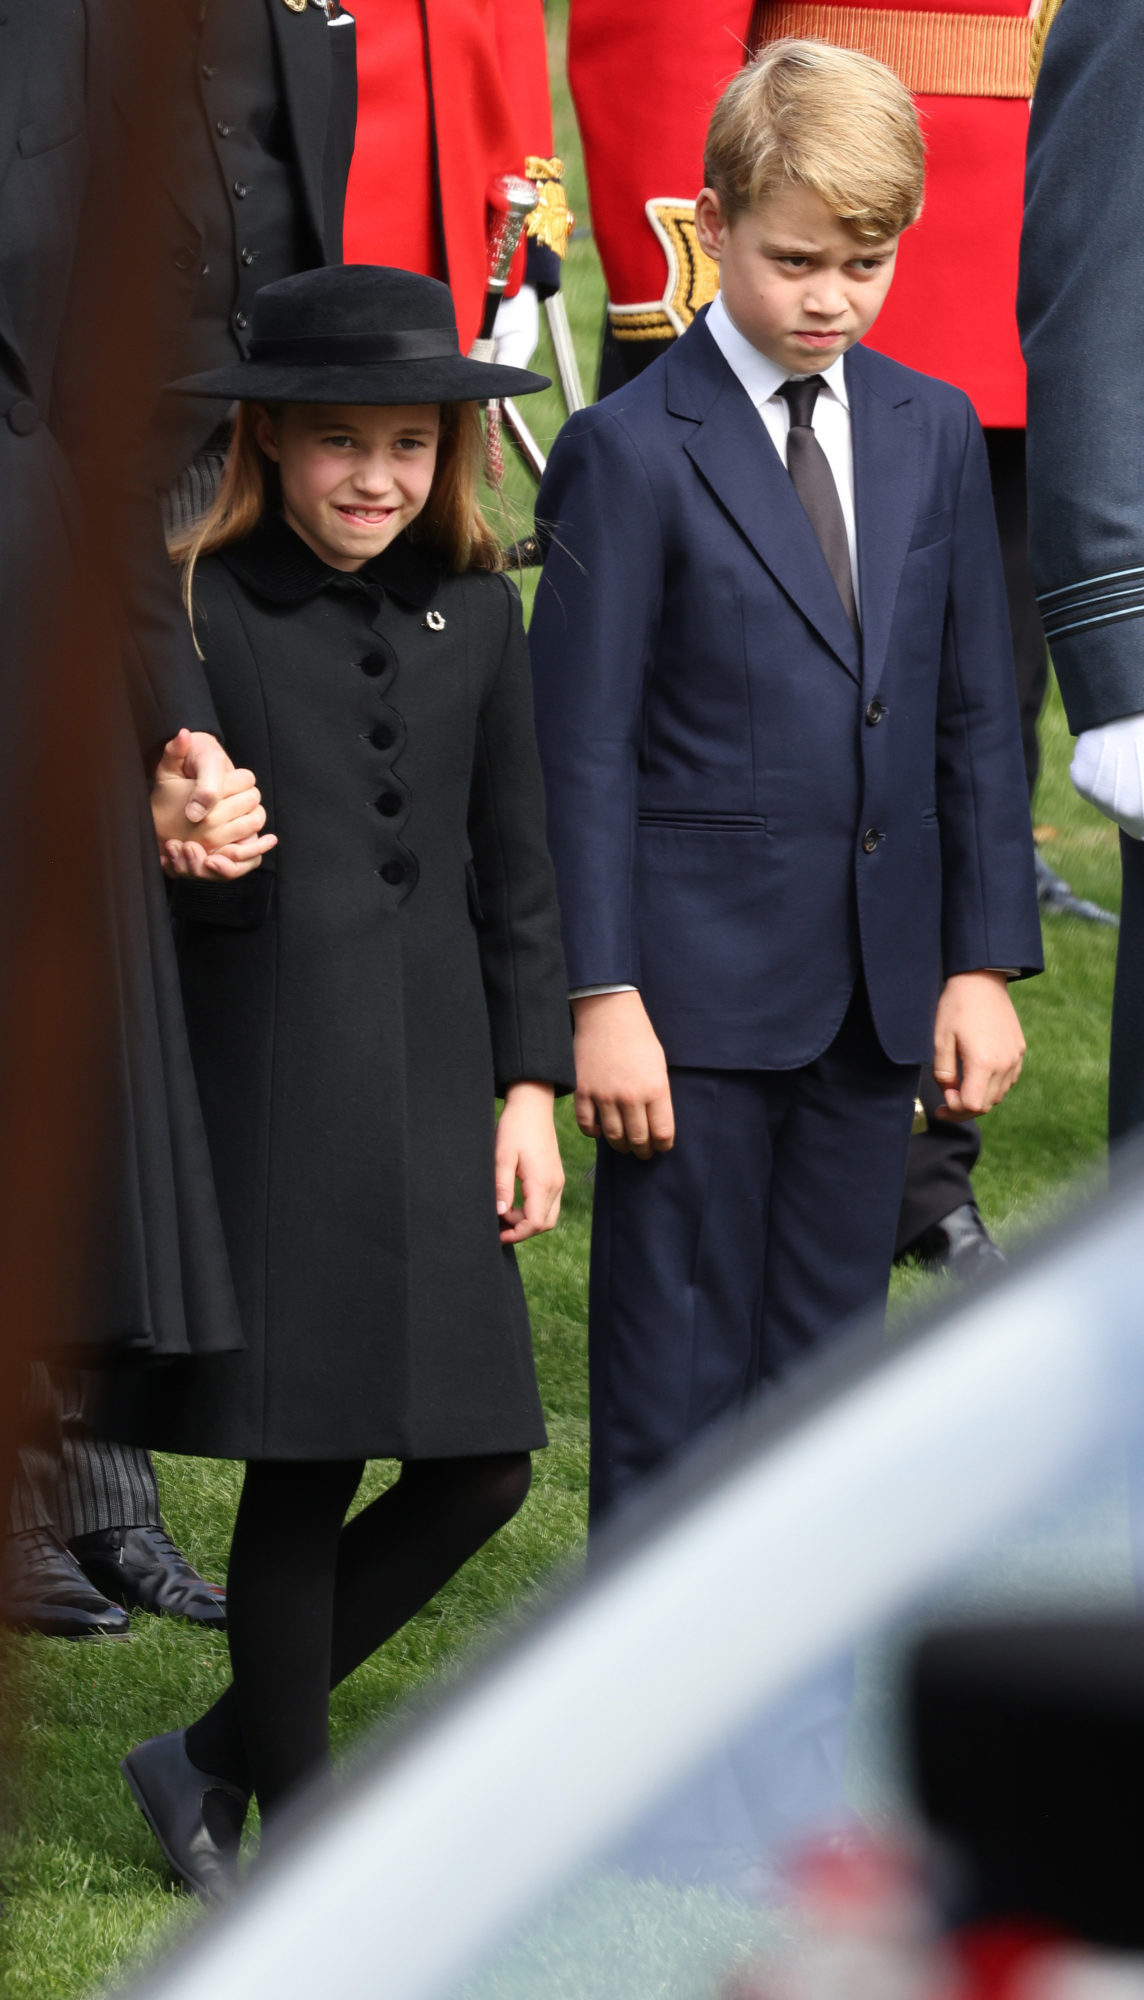 Princess Charlotte's Brooch at Queen Elizabeth's Funeral Meaning